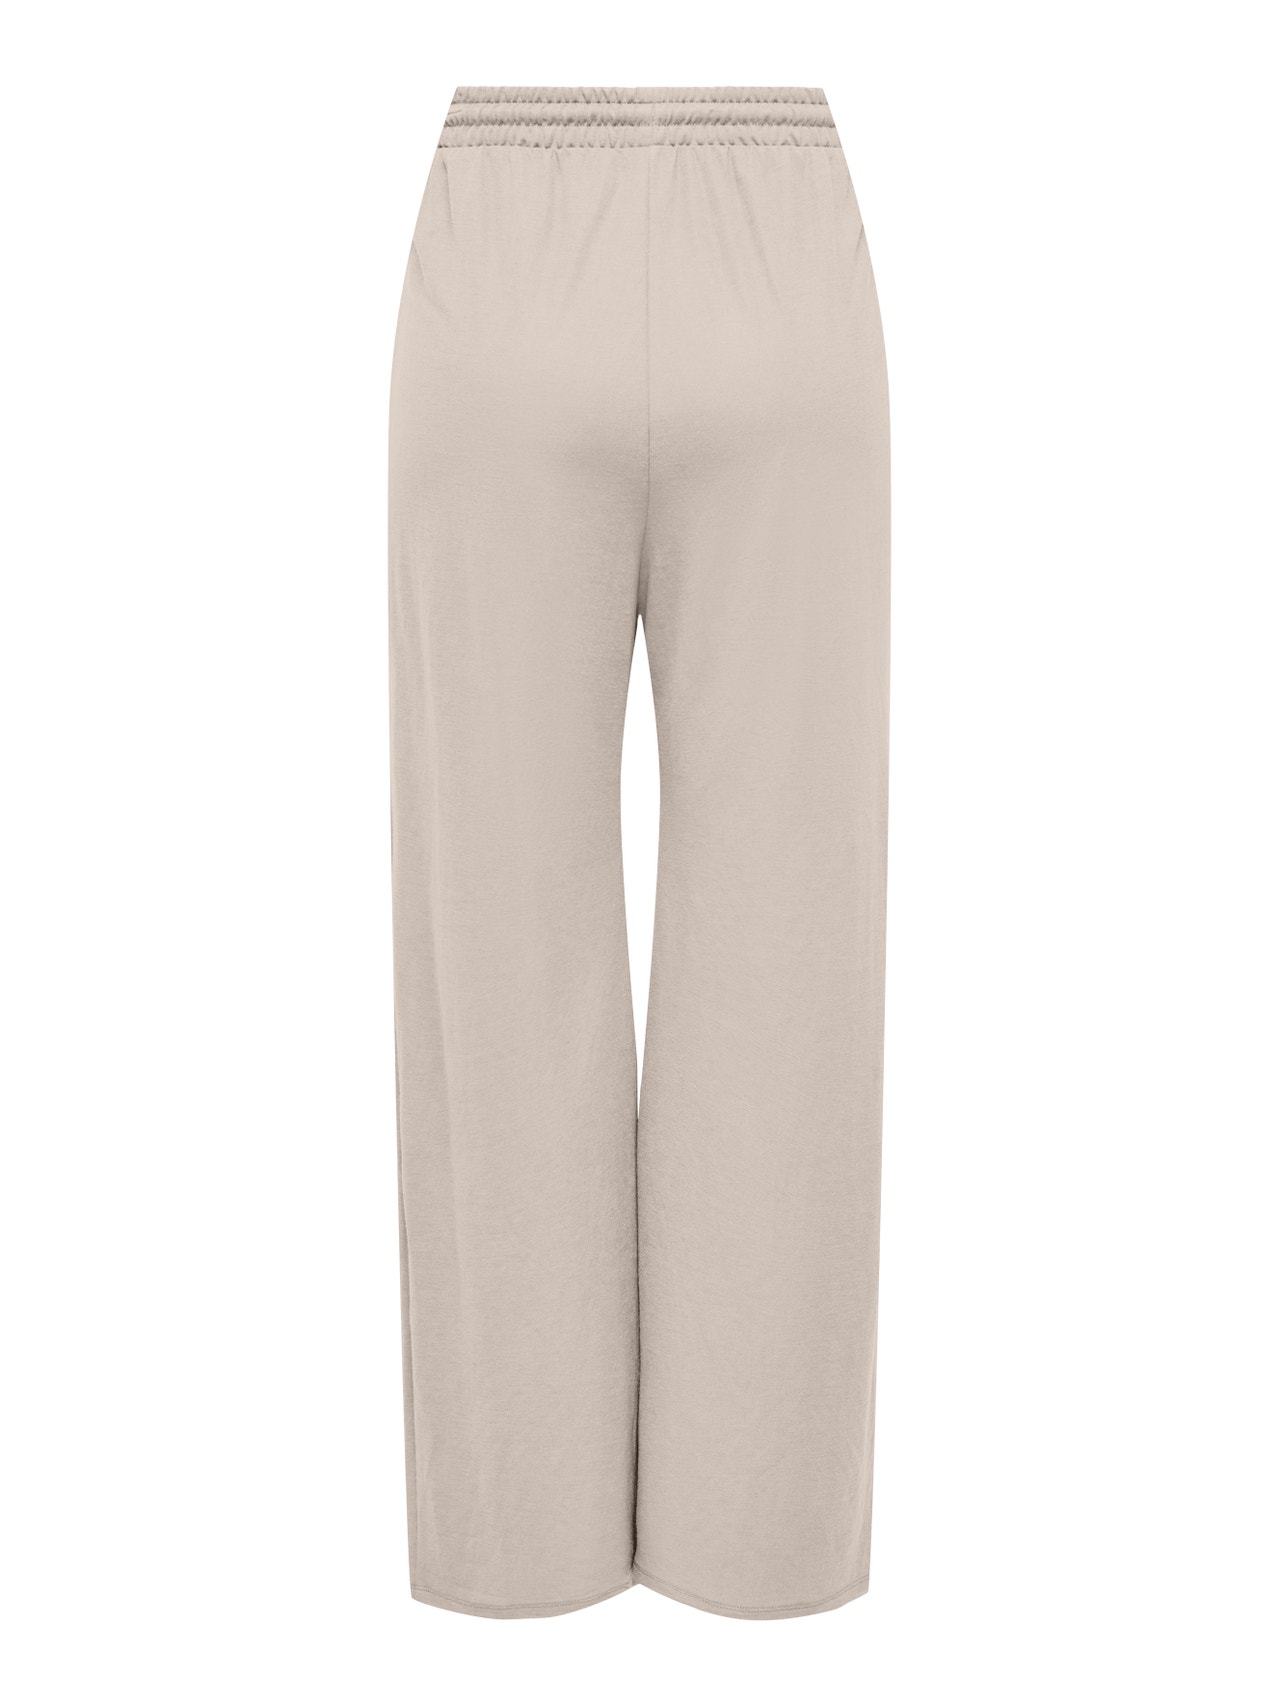 ONLY Classic trousers with strings -Pumice Stone - 15294429